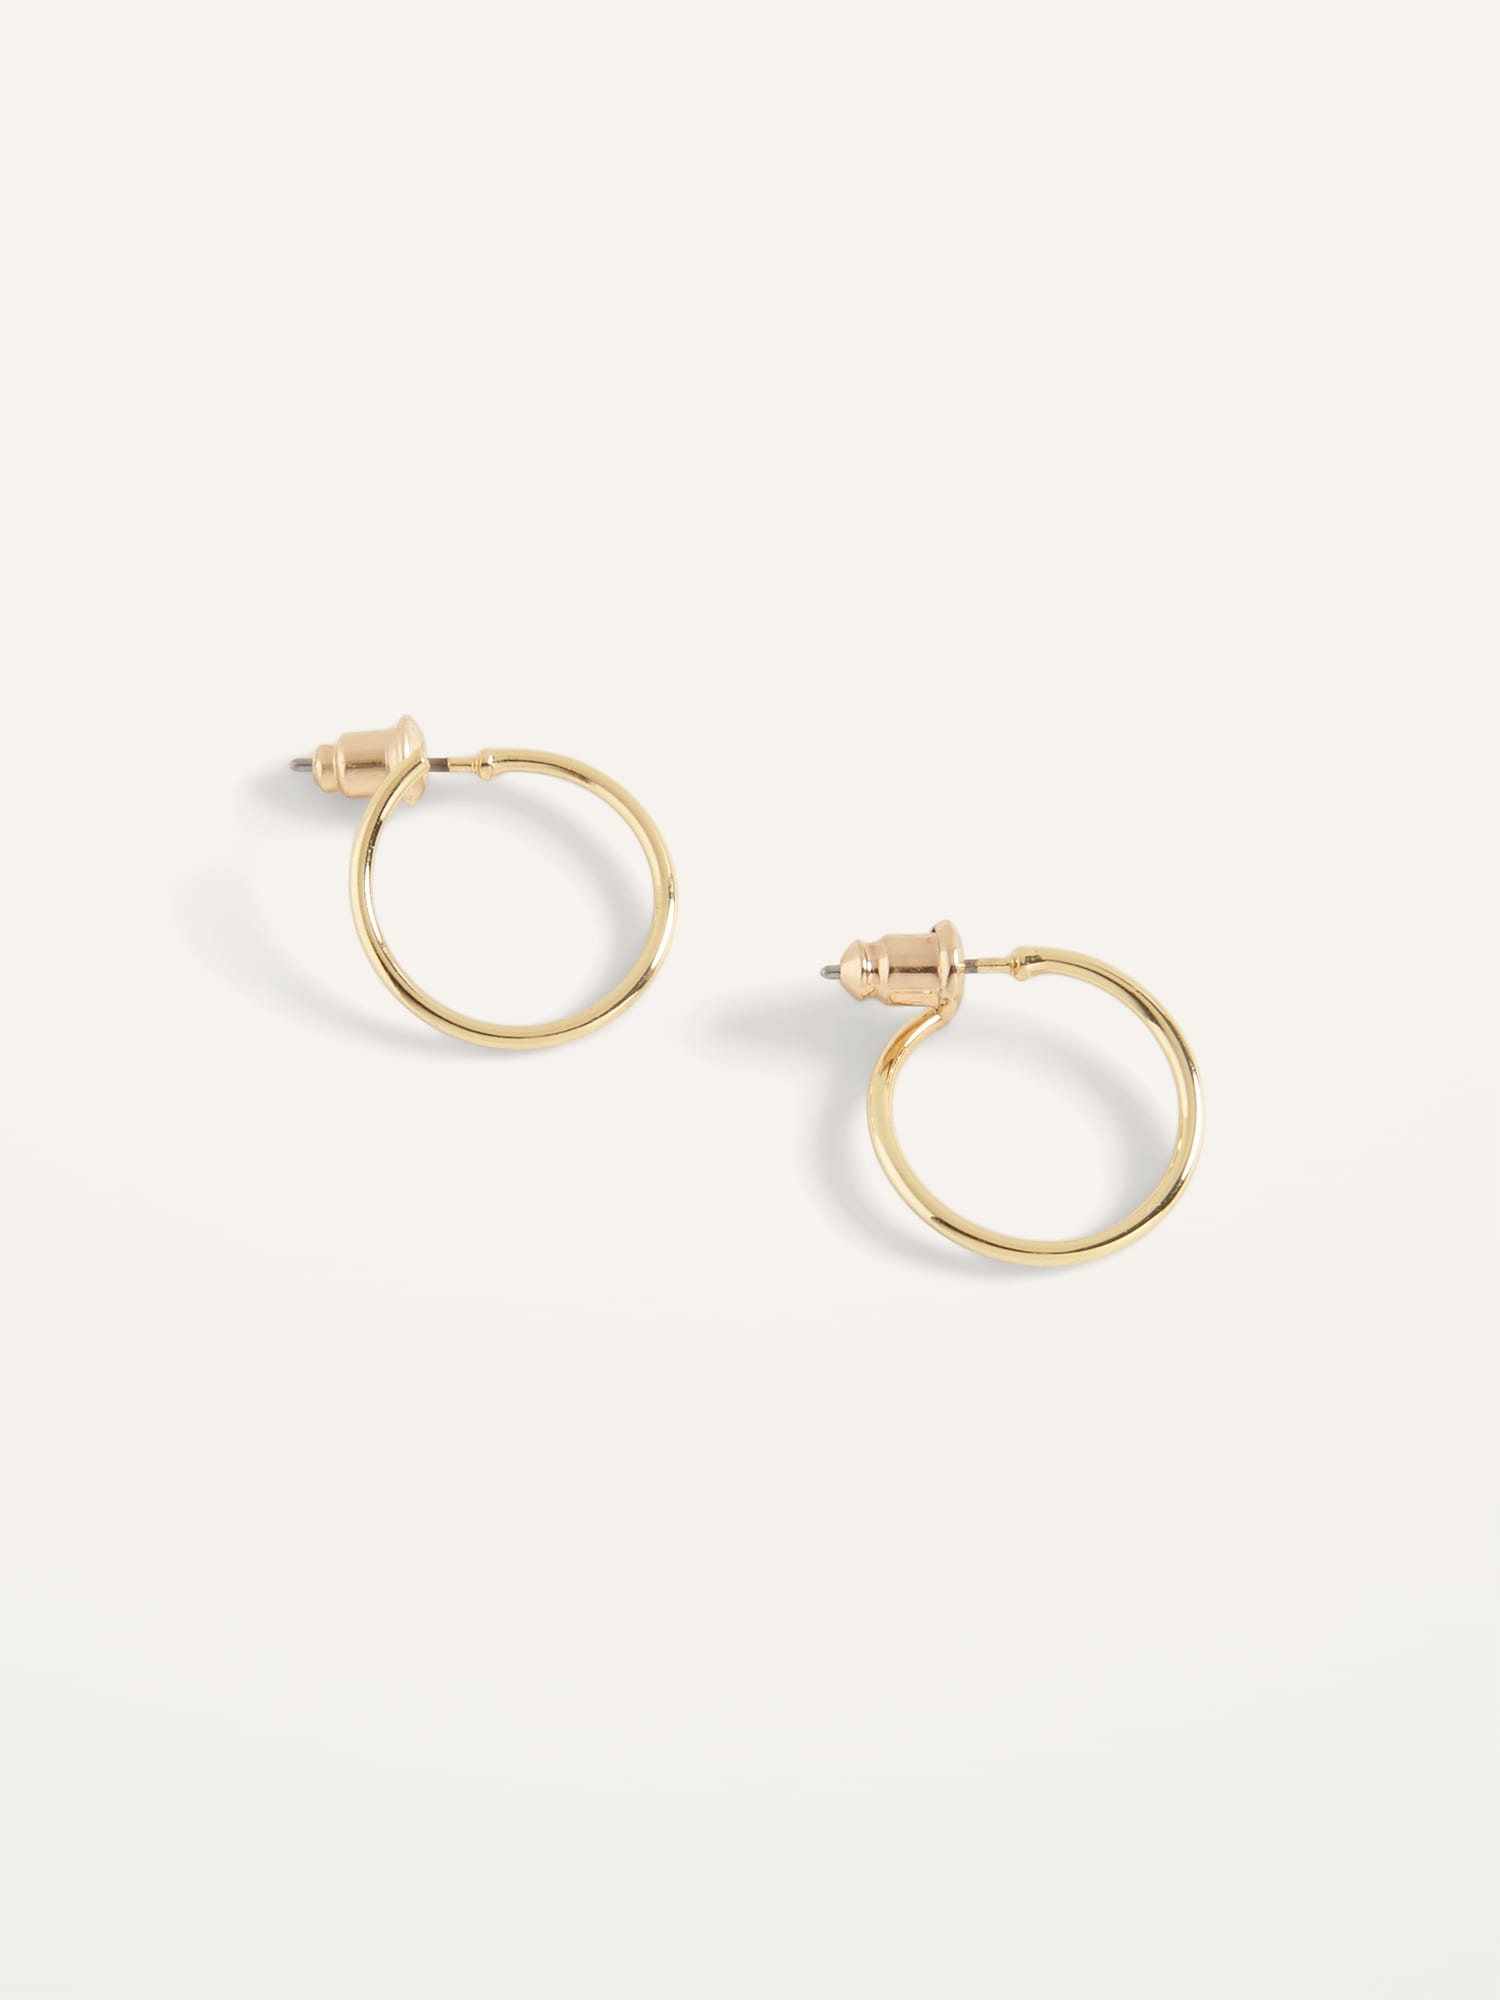 Real Gold-Plated Spiral Hoop Earrings for Women